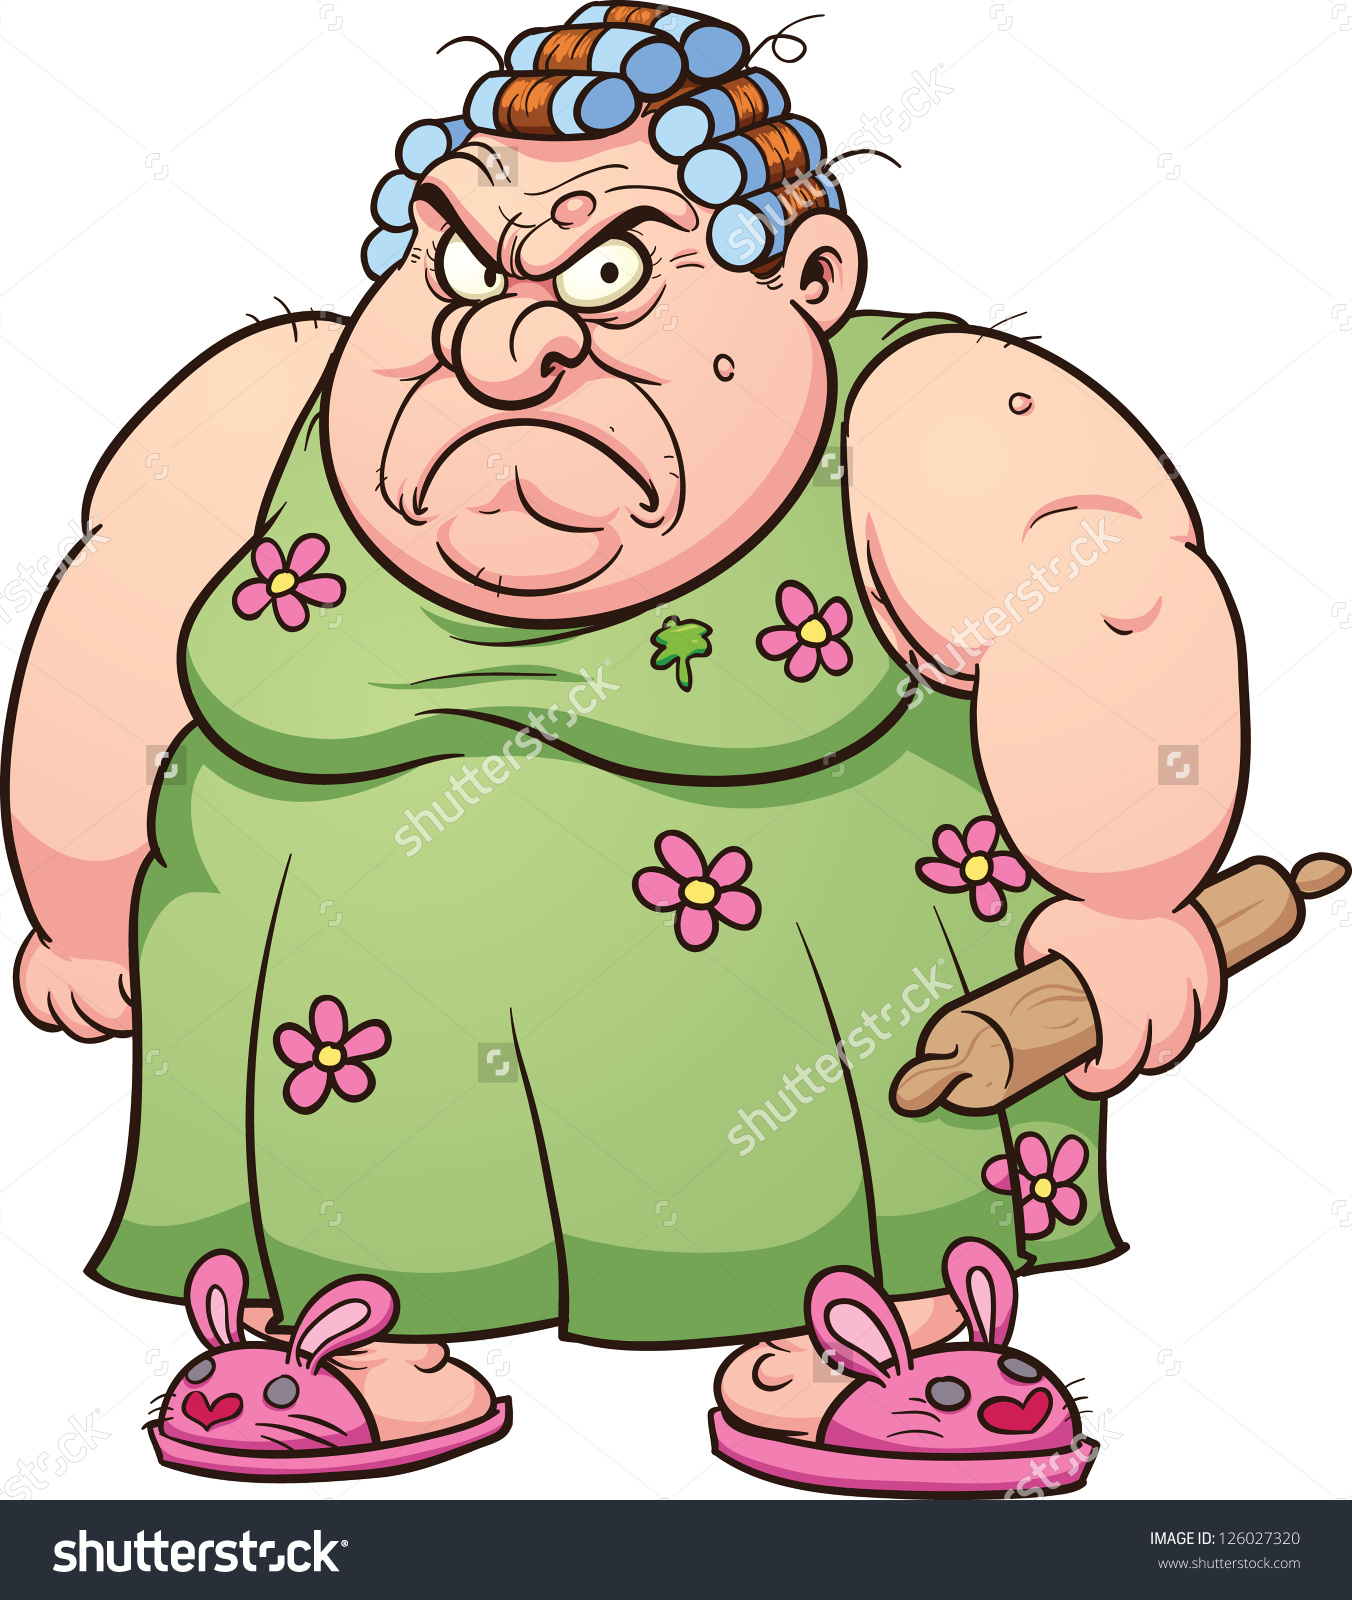 Funny Overweight Smoking Cartoon Woman Clipart.